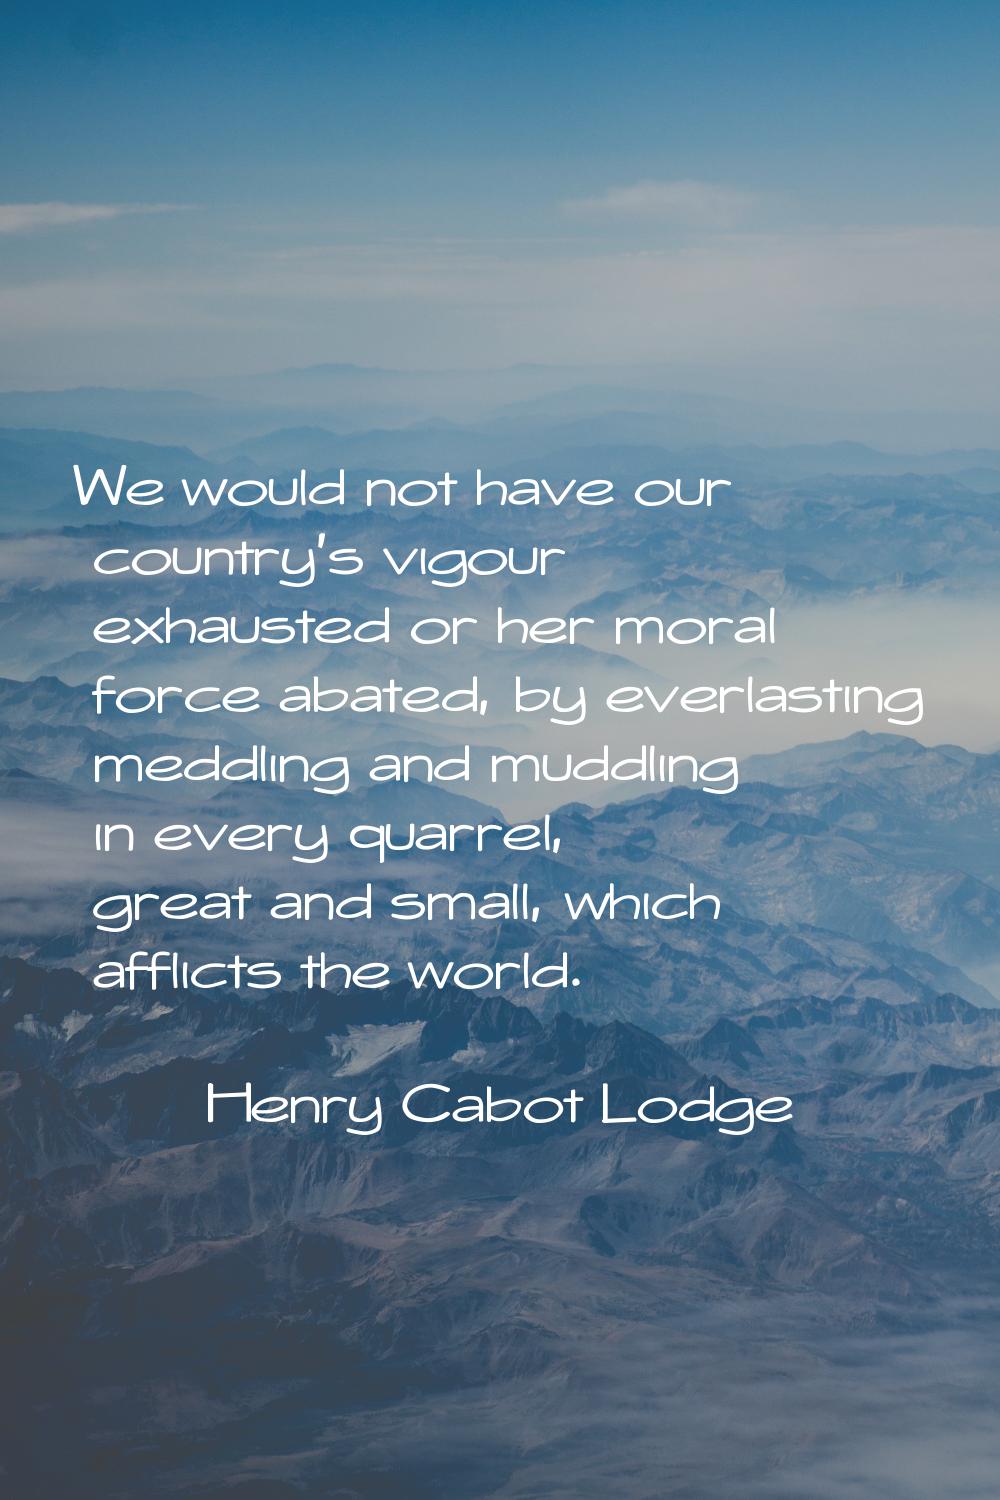 We would not have our country's vigour exhausted or her moral force abated, by everlasting meddling